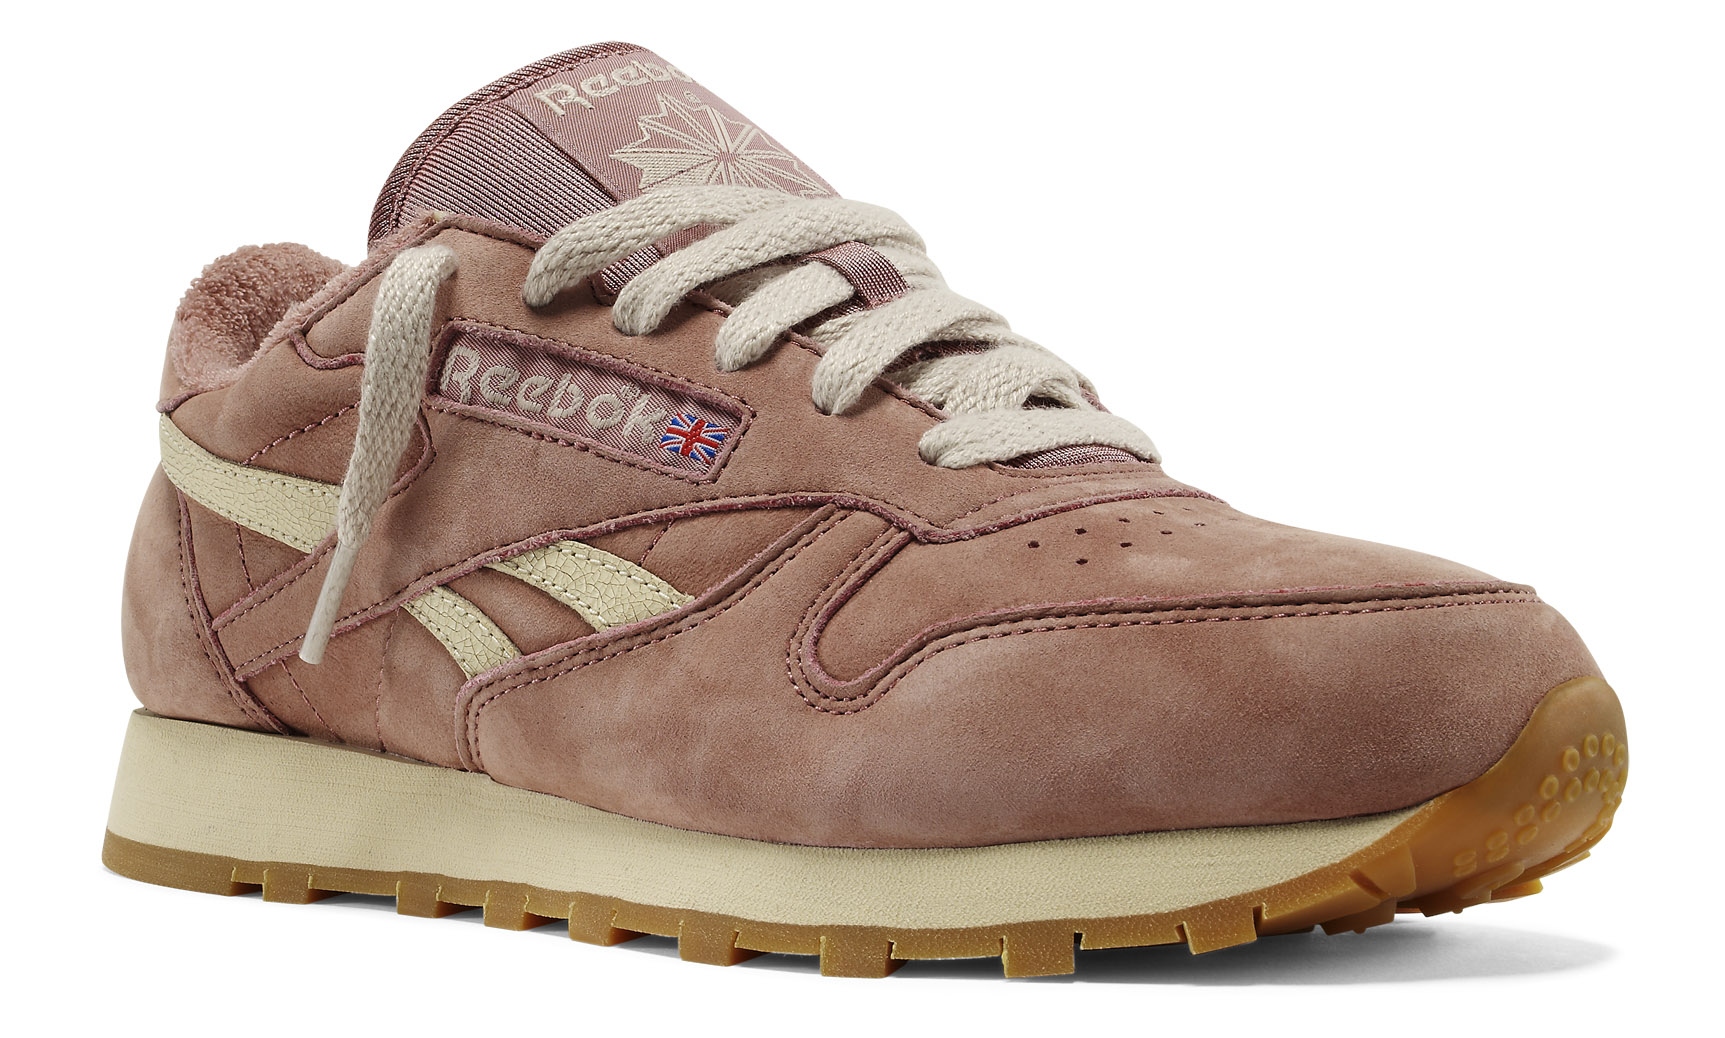 reebok classic leather ess sneakers in pink